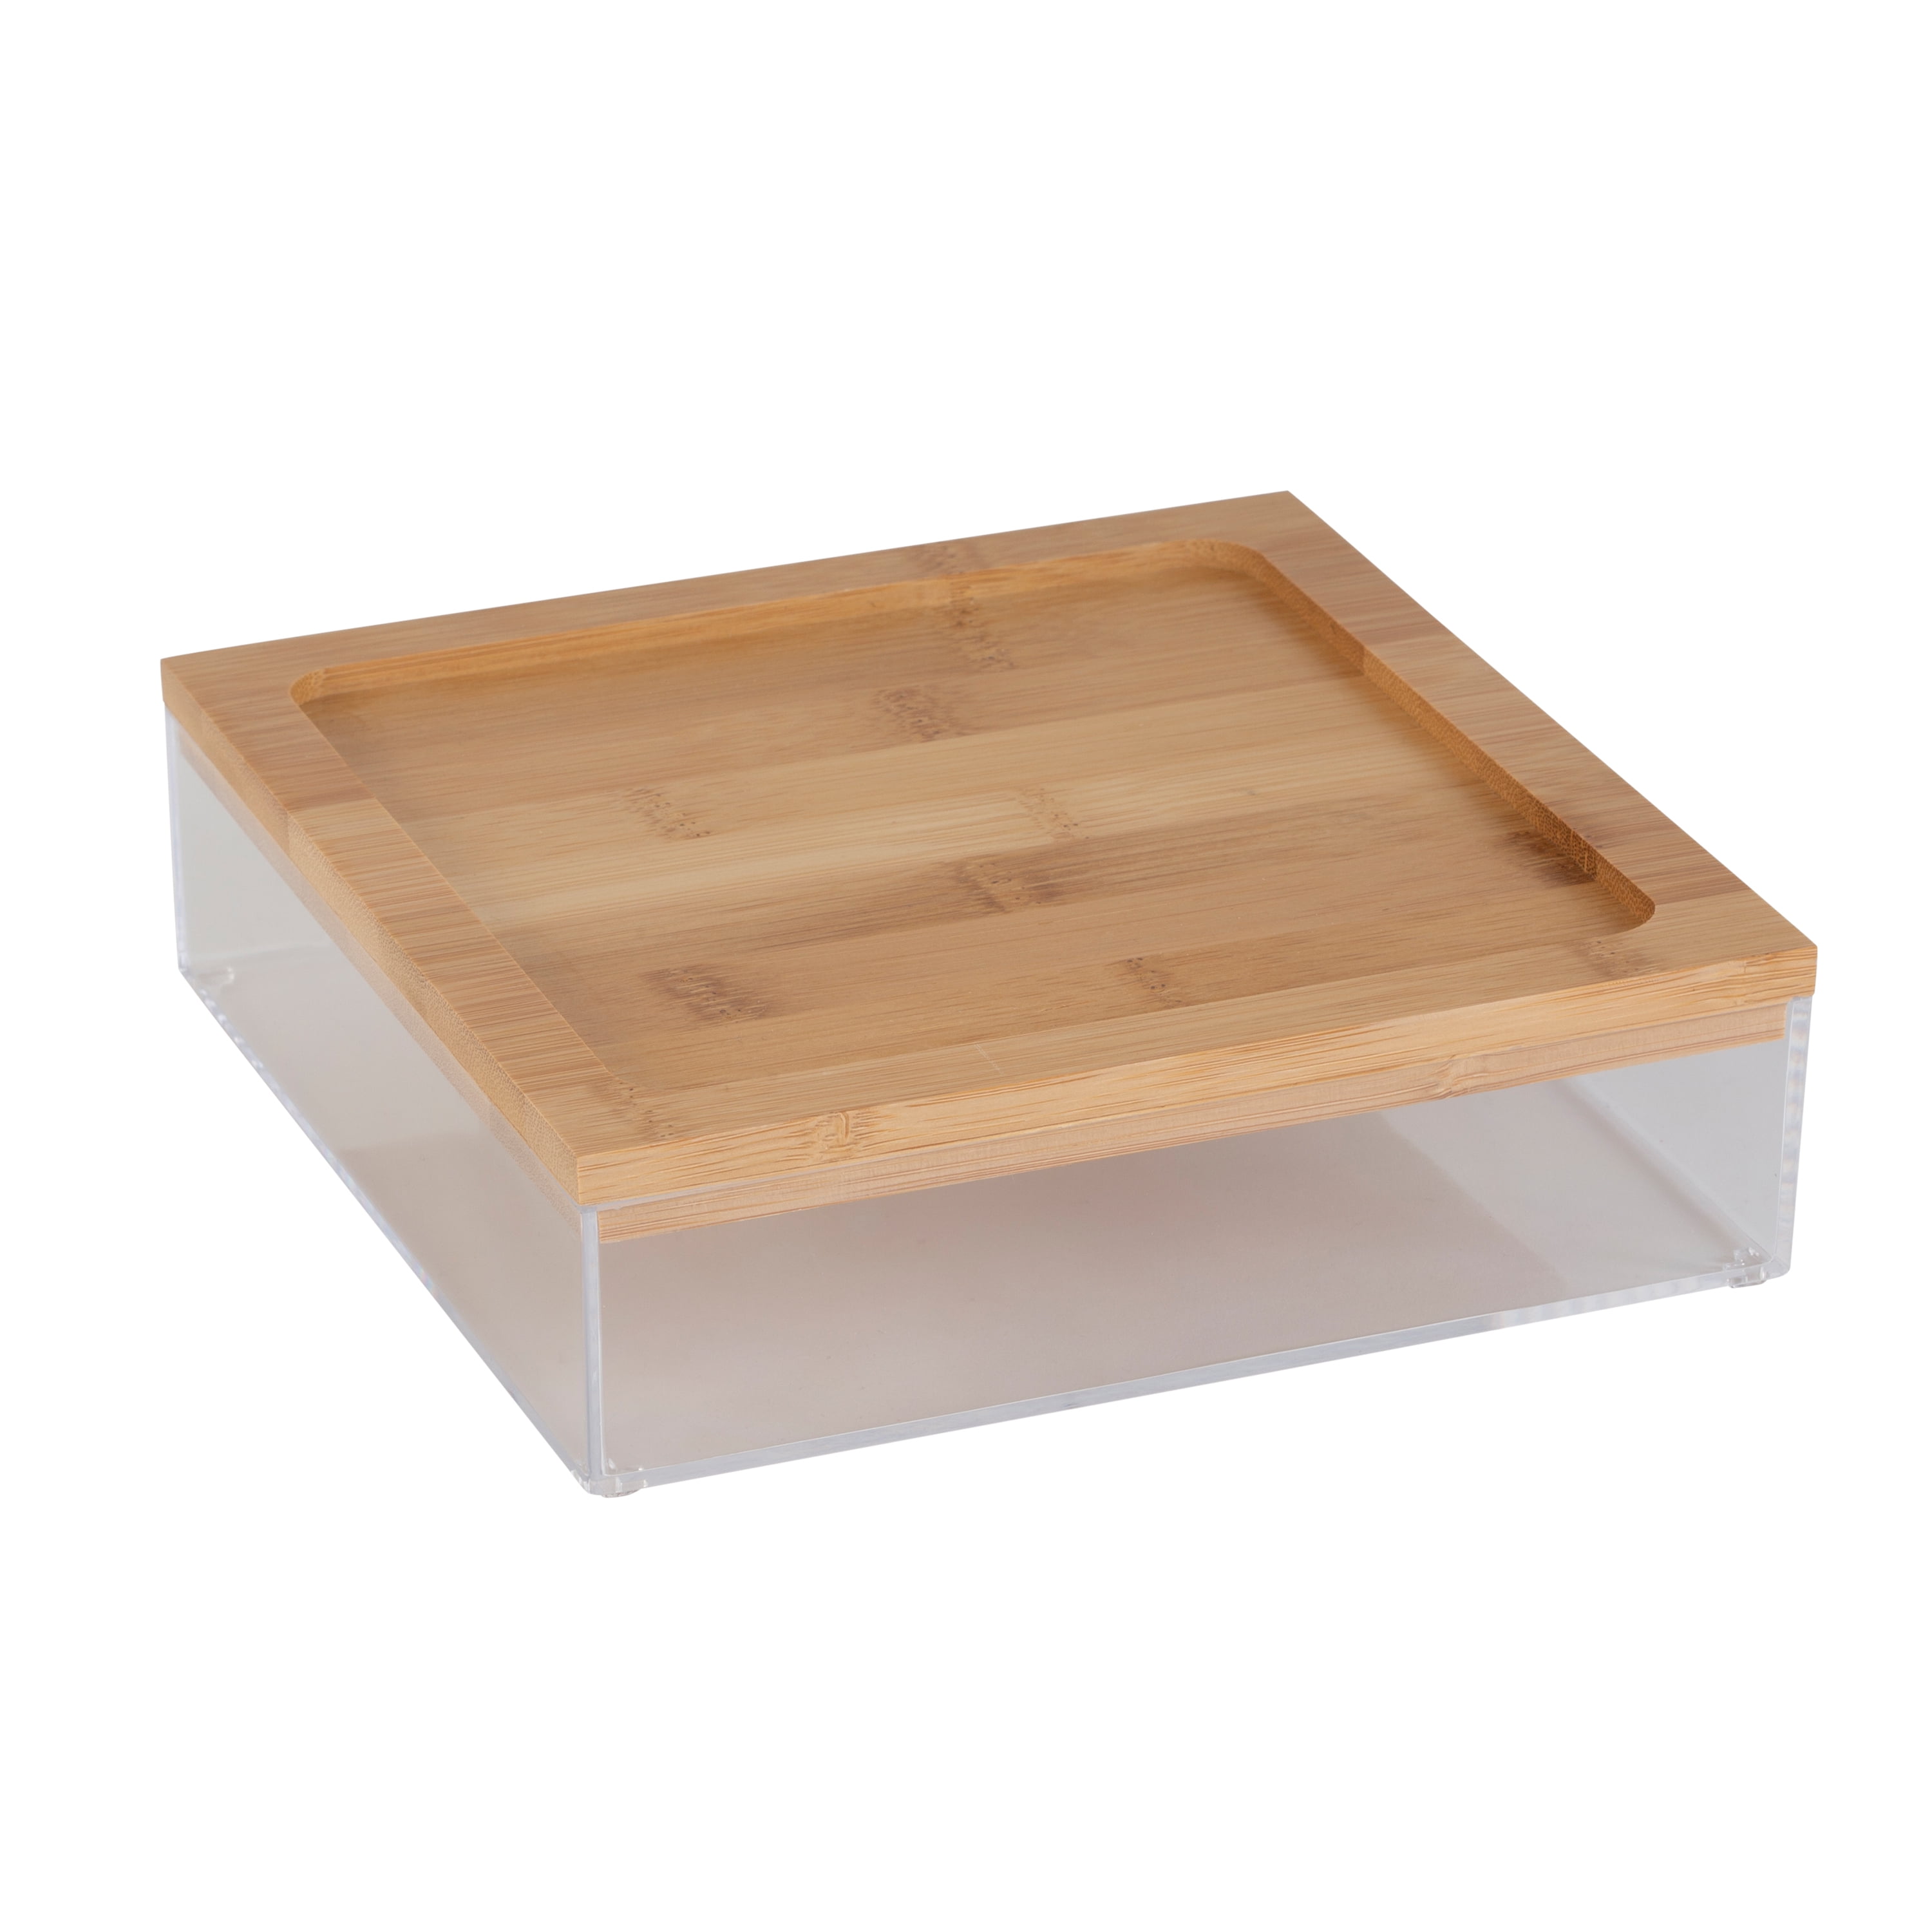 Bamboo Lid Square For 7572